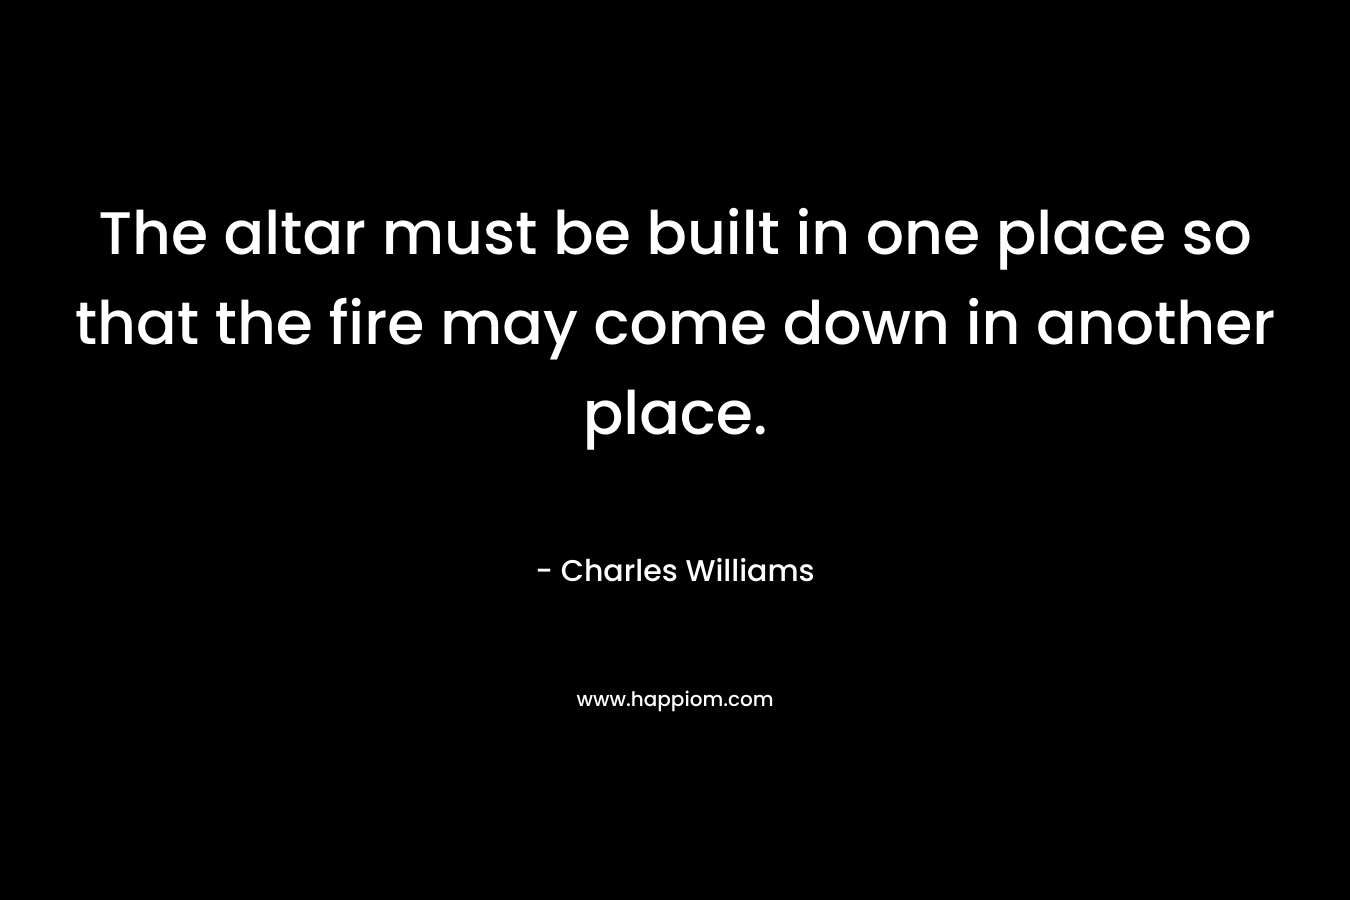 The altar must be built in one place so that the fire may come down in another place. – Charles Williams